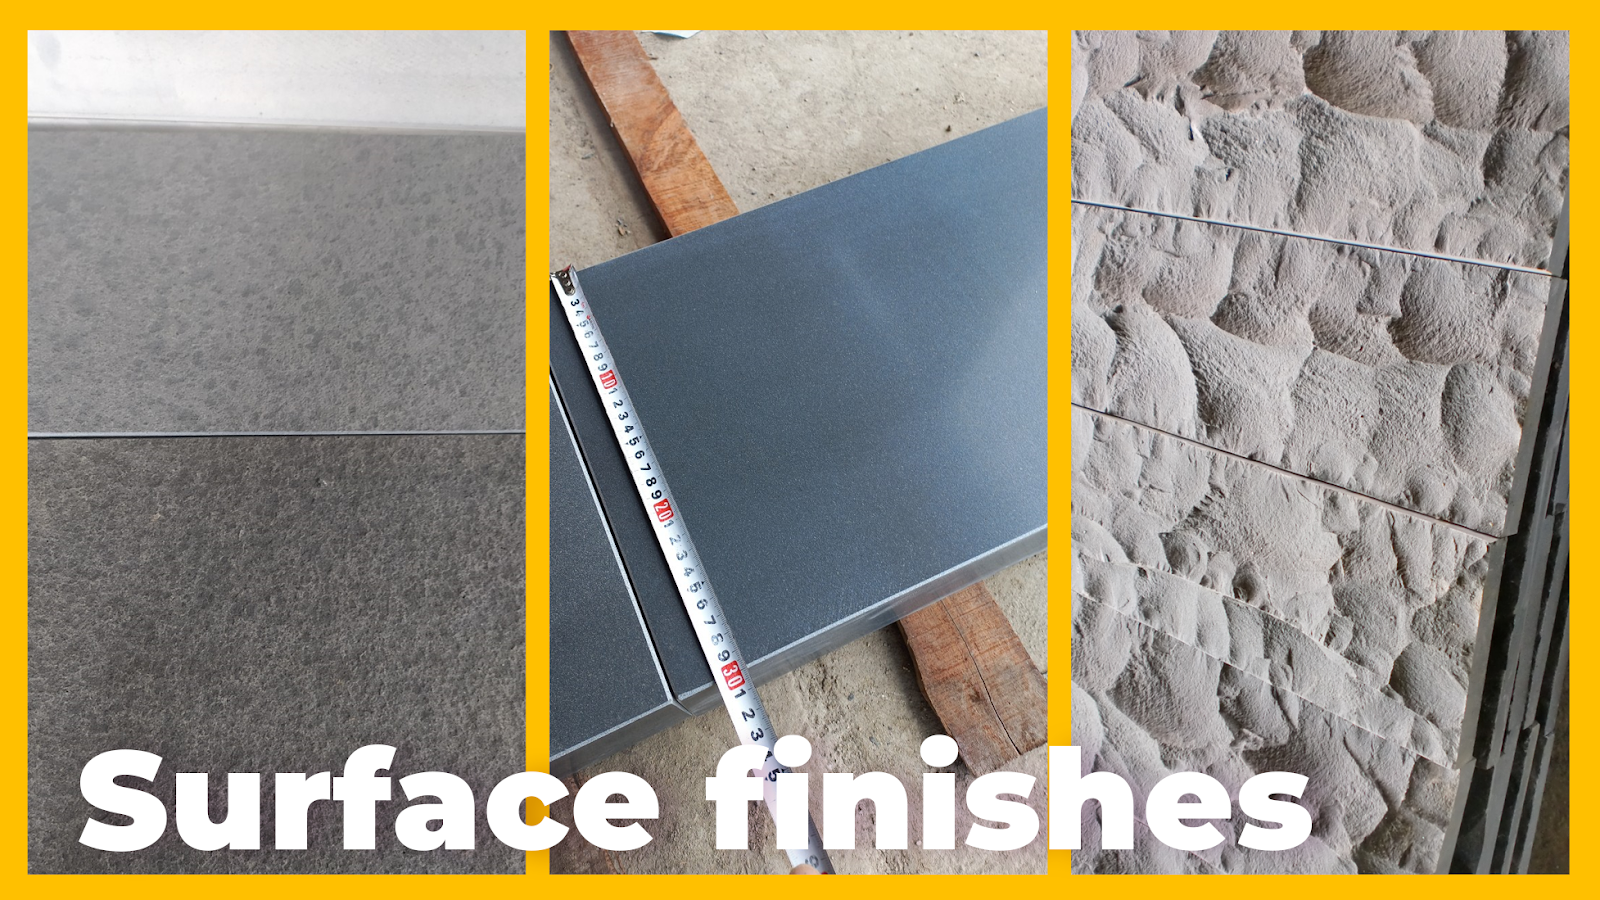 Surface finishes contribute to the natural stone Durability